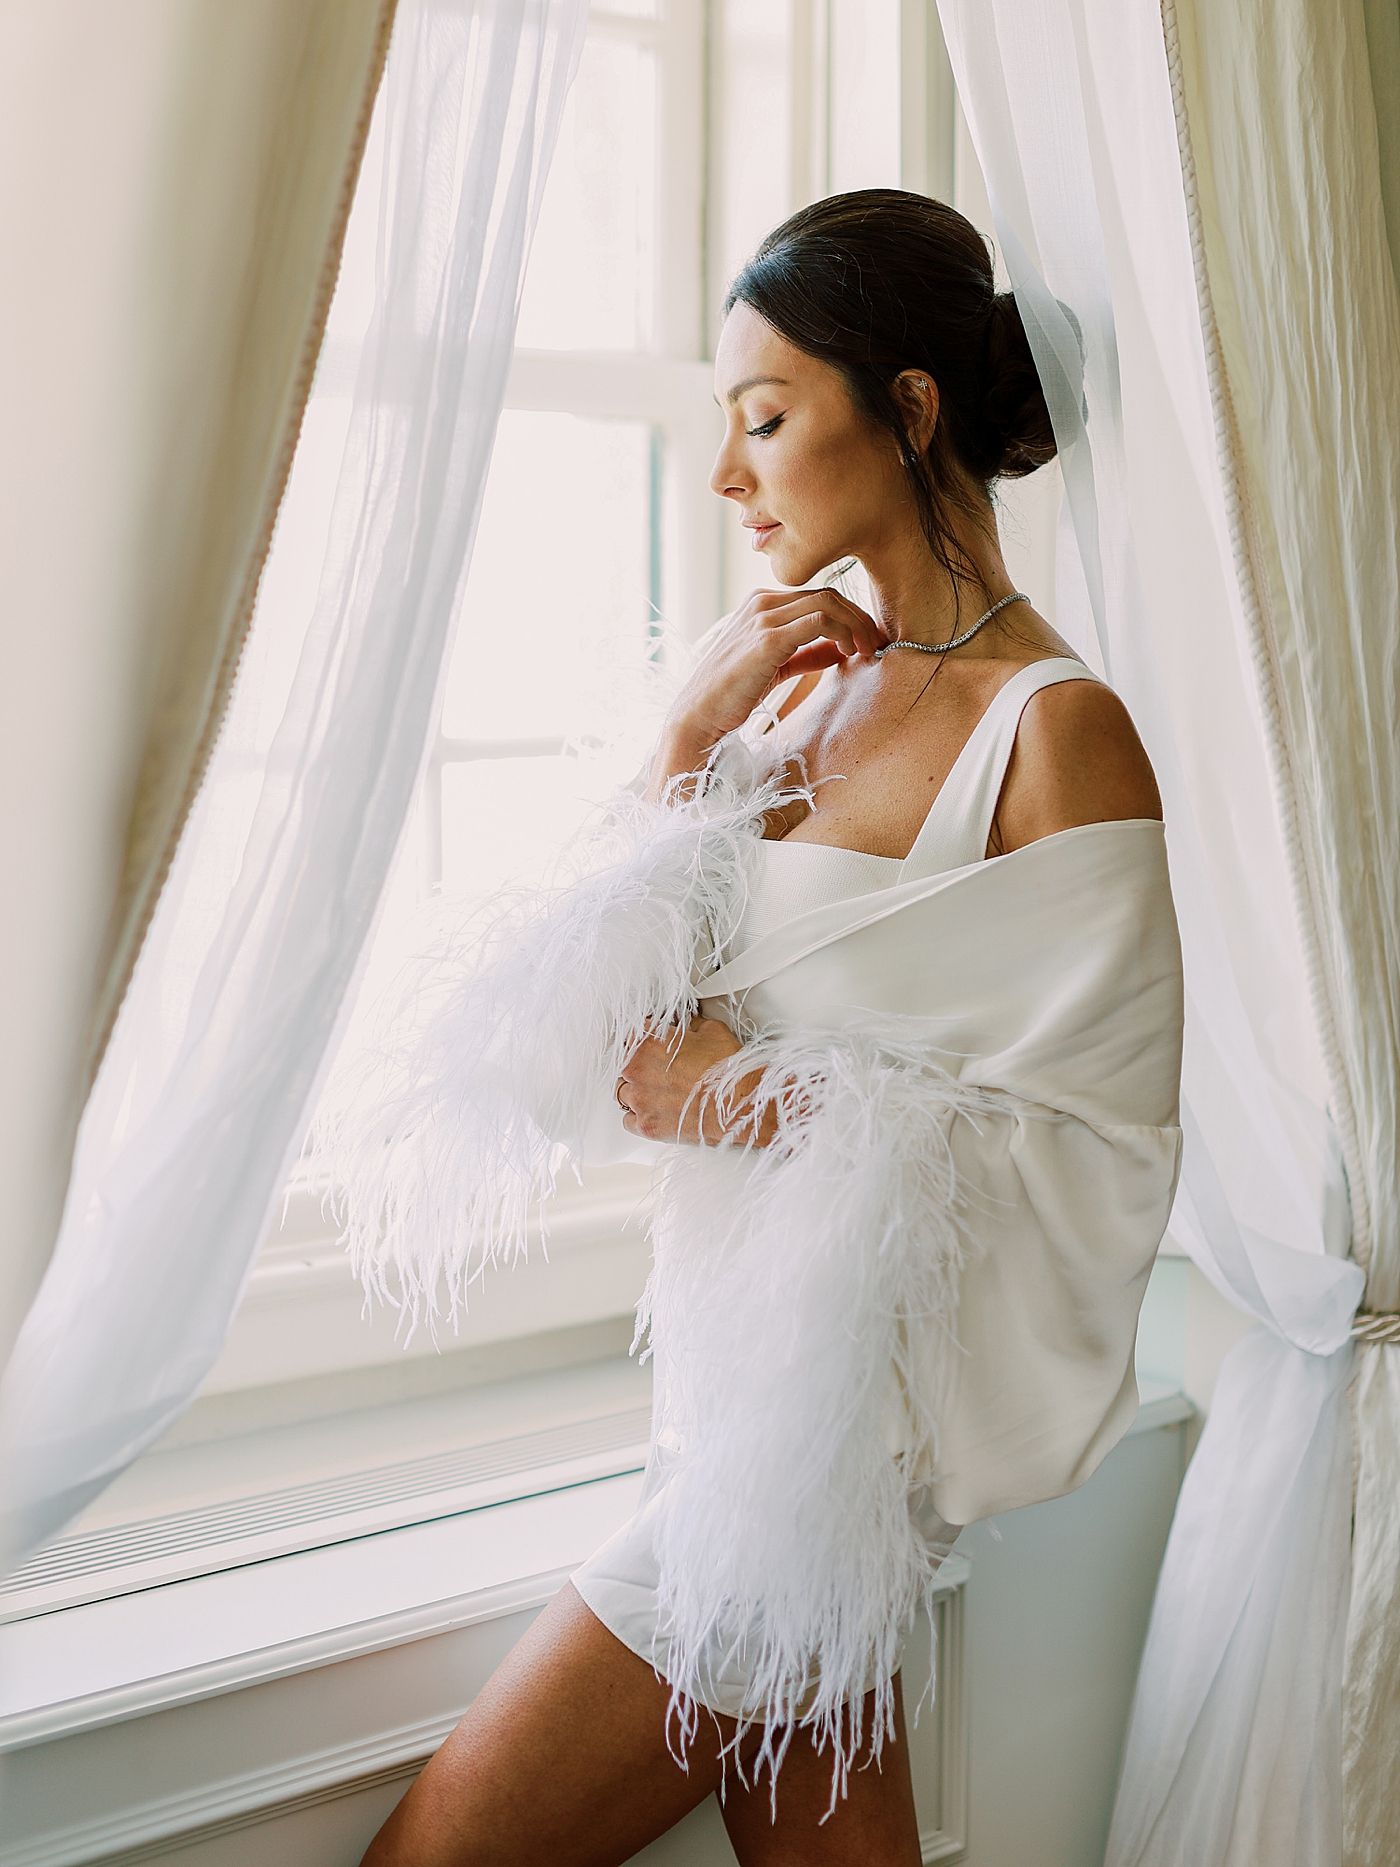 Bride in a robe with fluff sleeves looking out the window | Image by Diane Sotero Photography